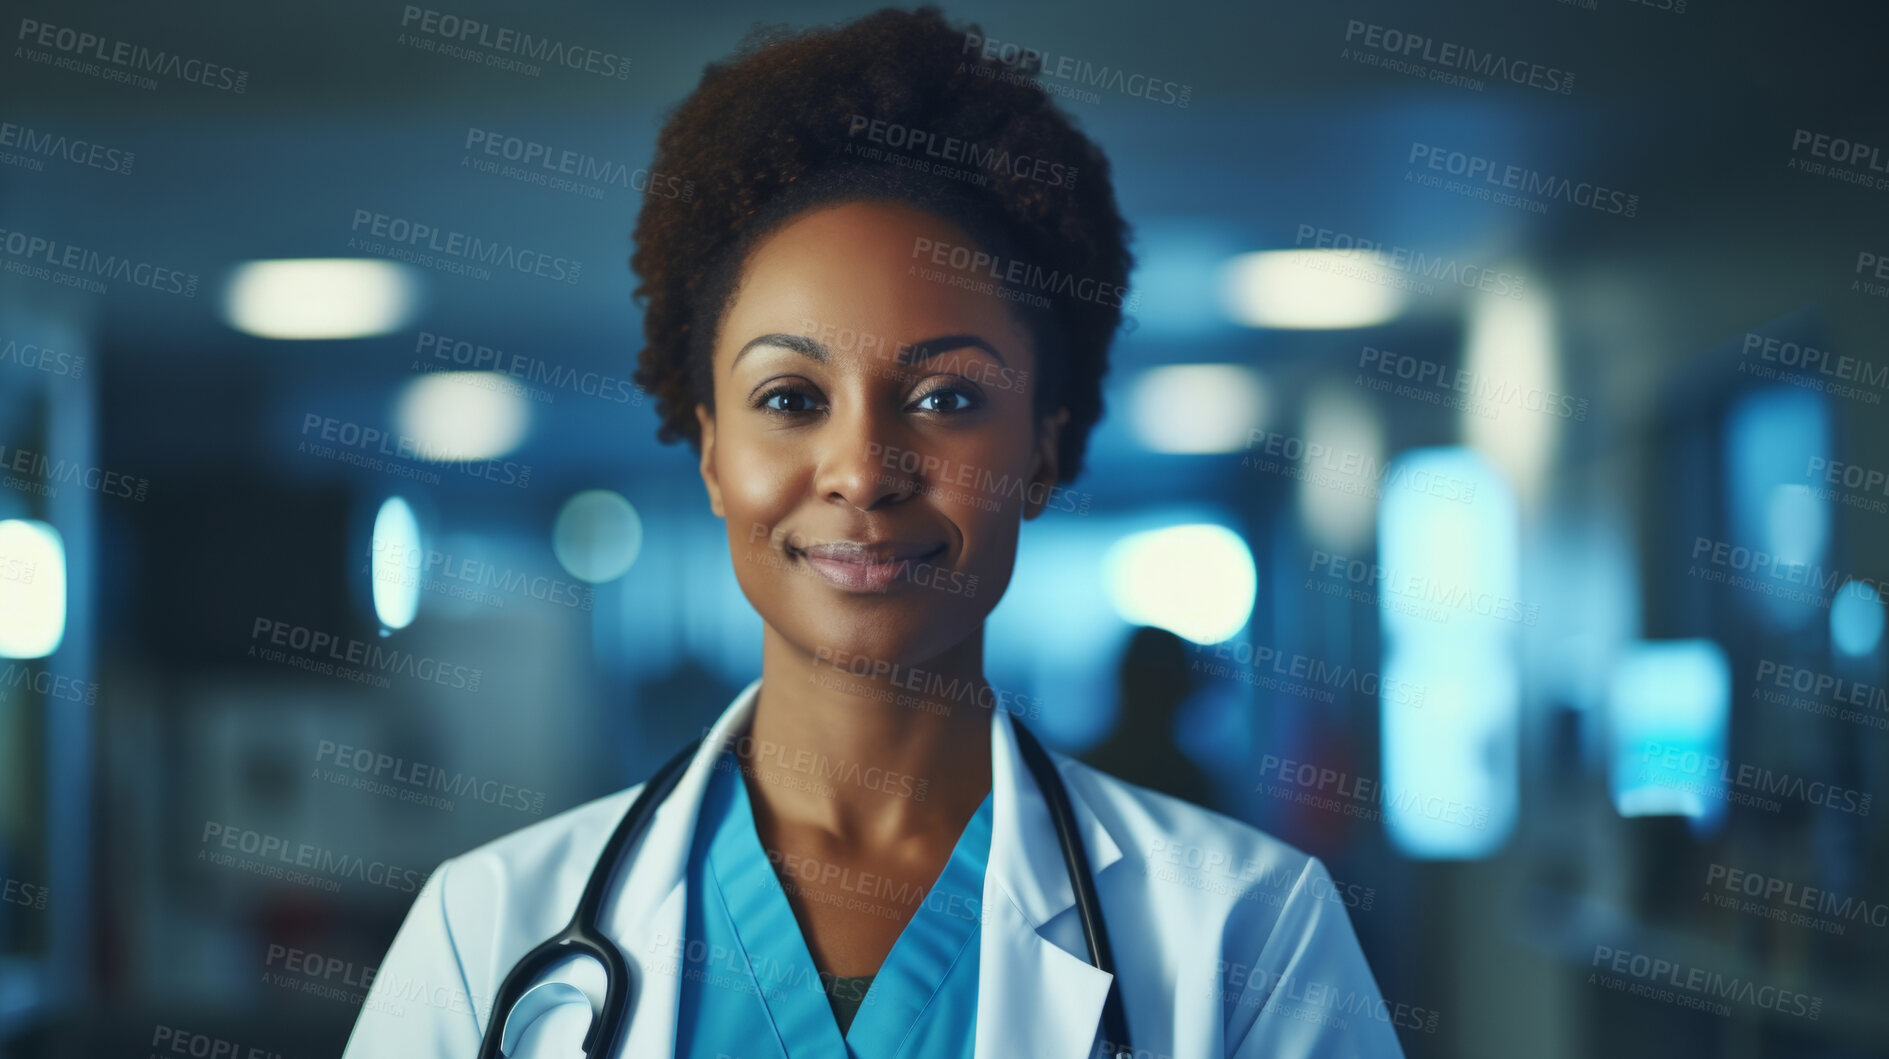 Buy stock photo Portrait of female African American doctor standing in a hospital at night for night shift